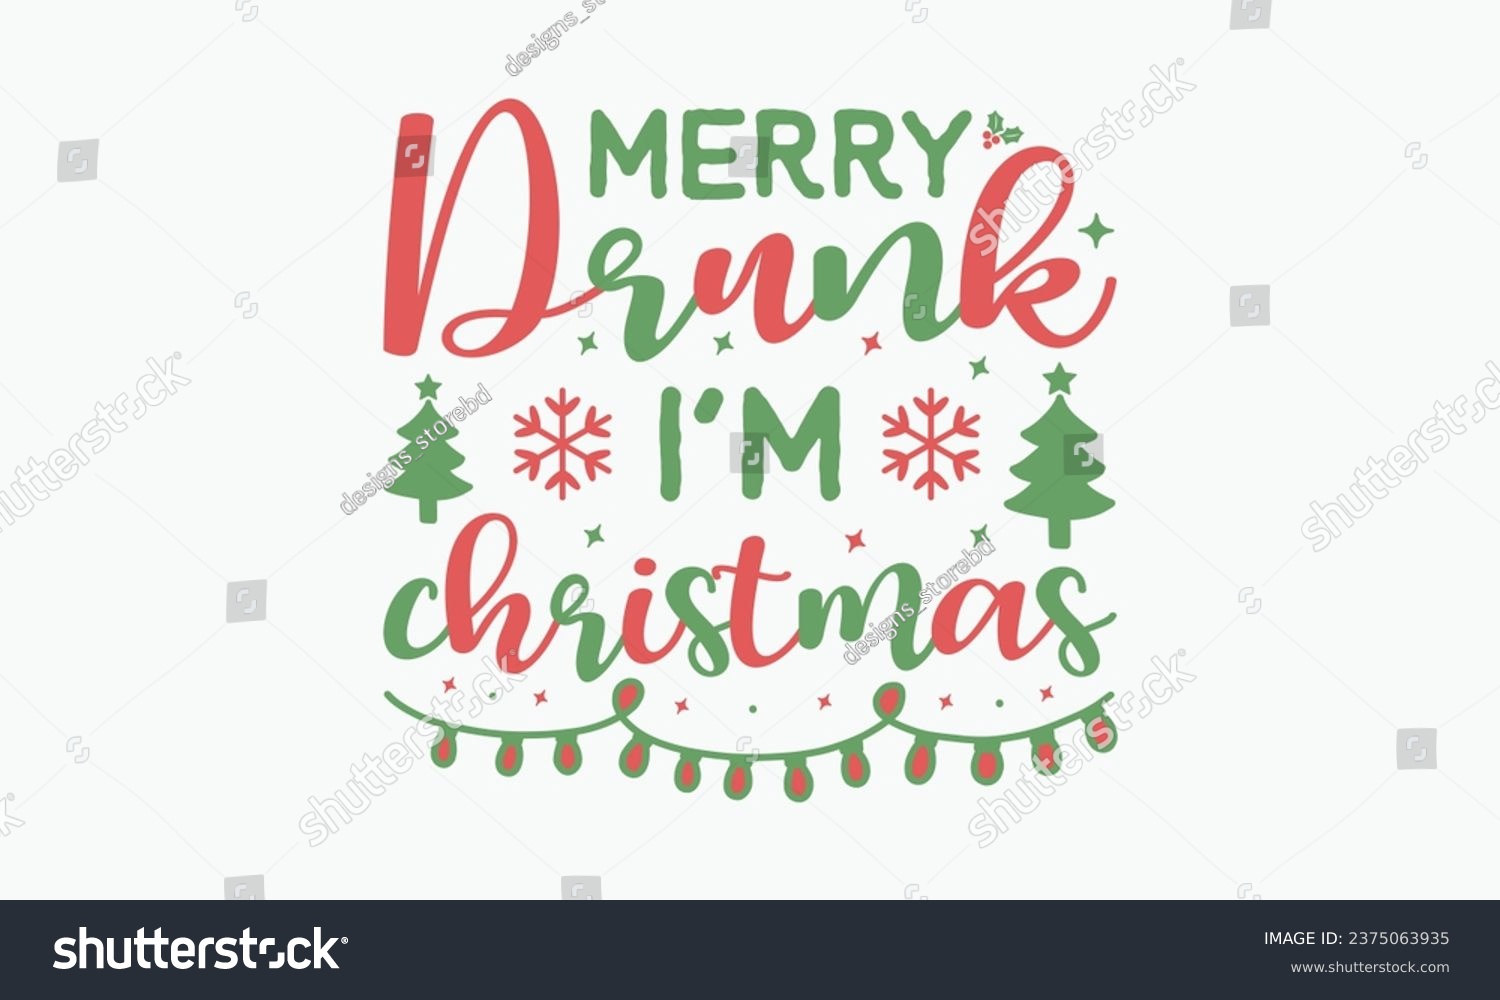 SVG of Merry drunk i'm christmas, Christmas T-shirts, Christmas vector quote design bundle, Holiday quotes, Santa, Cut Files Cricut, Silhouette, happy new year, Vintage Vector graphic typographic design for svg